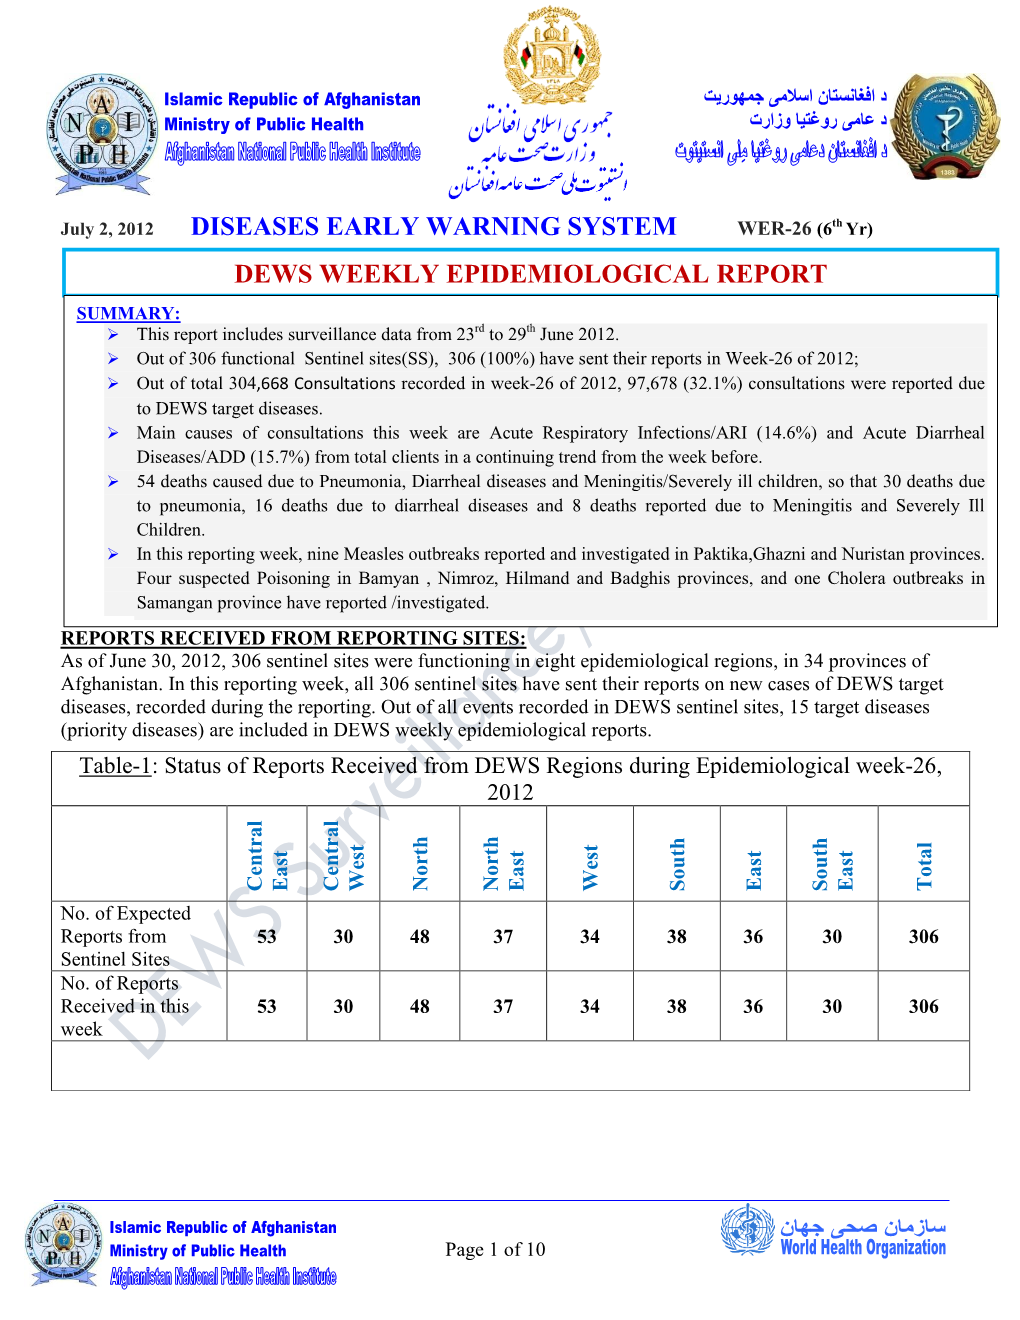 July 2, 2012 DISEASES EARLY WARNING SYSTEM WER-26 (6Th Yr)